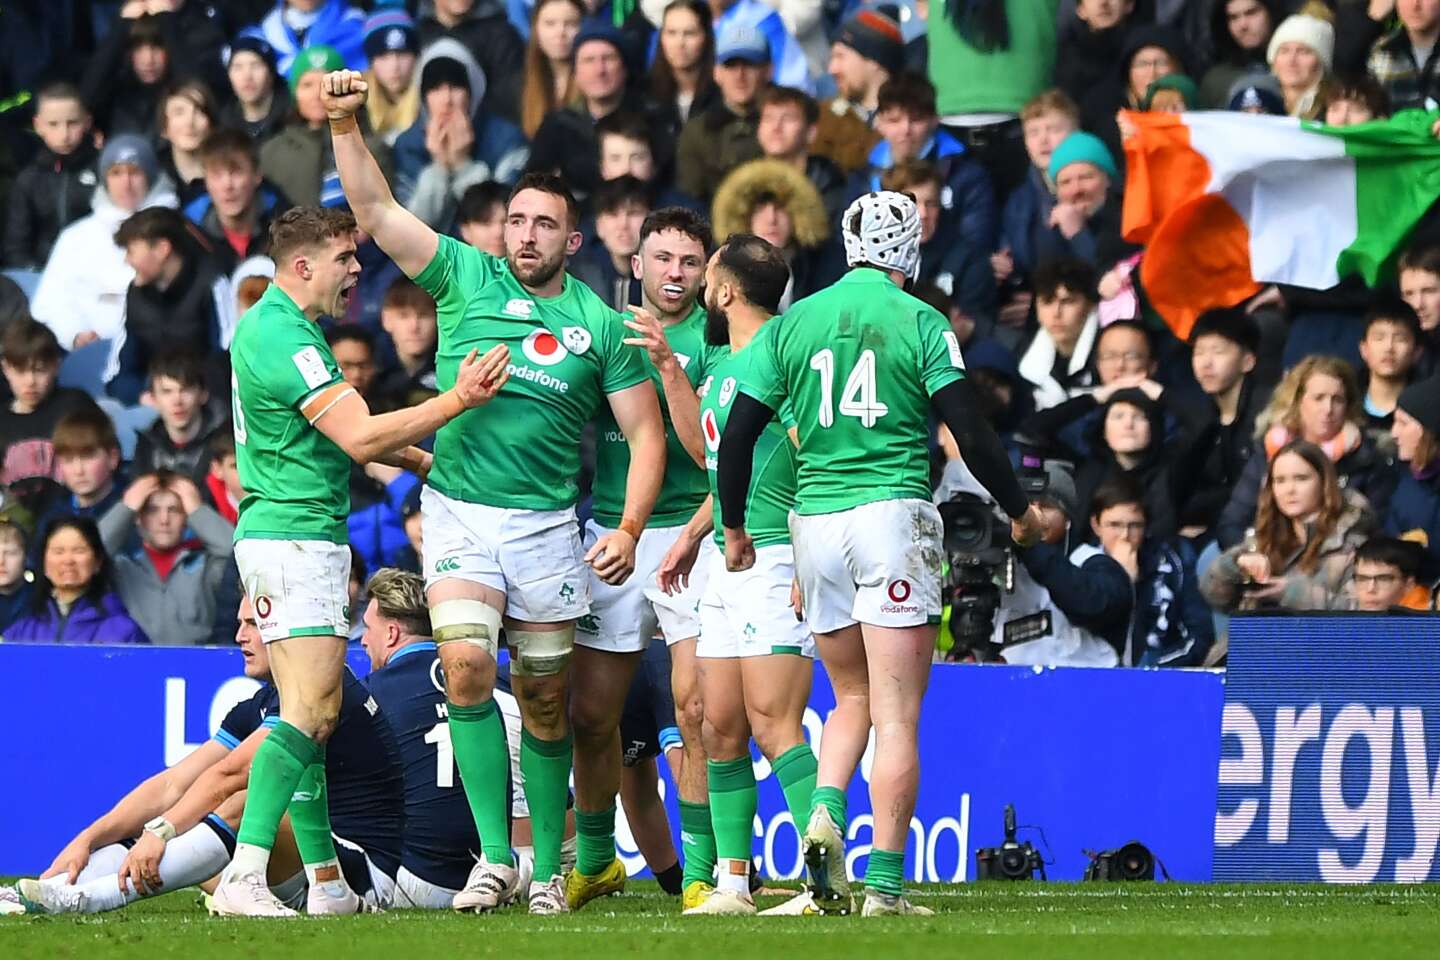 Ireland take down Scotland and remain unbeaten in the competition